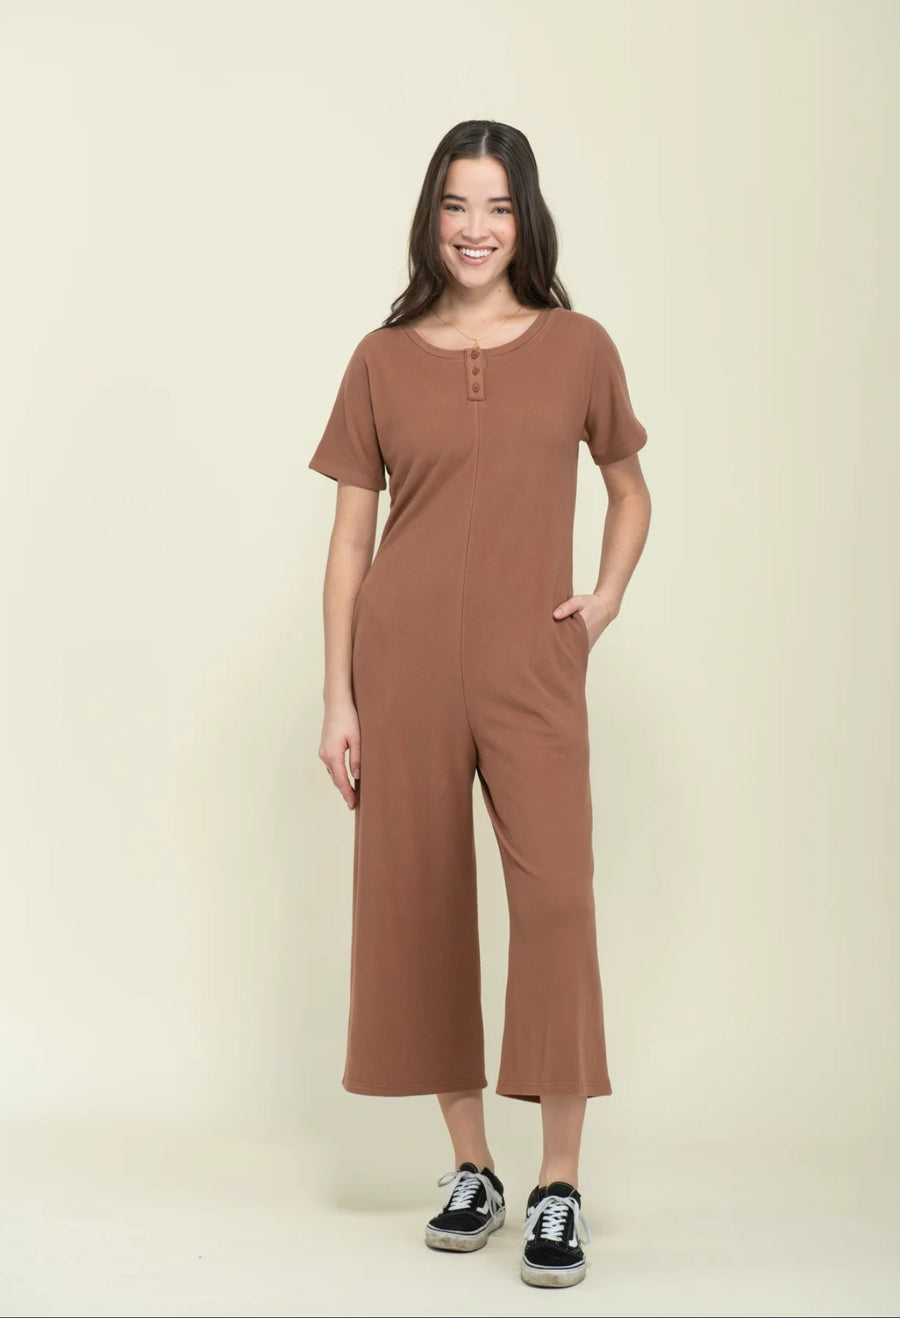 Jonie brushed jersey jumpsuit by Orb - Camel - Blue Sky Fashions & Lingerie